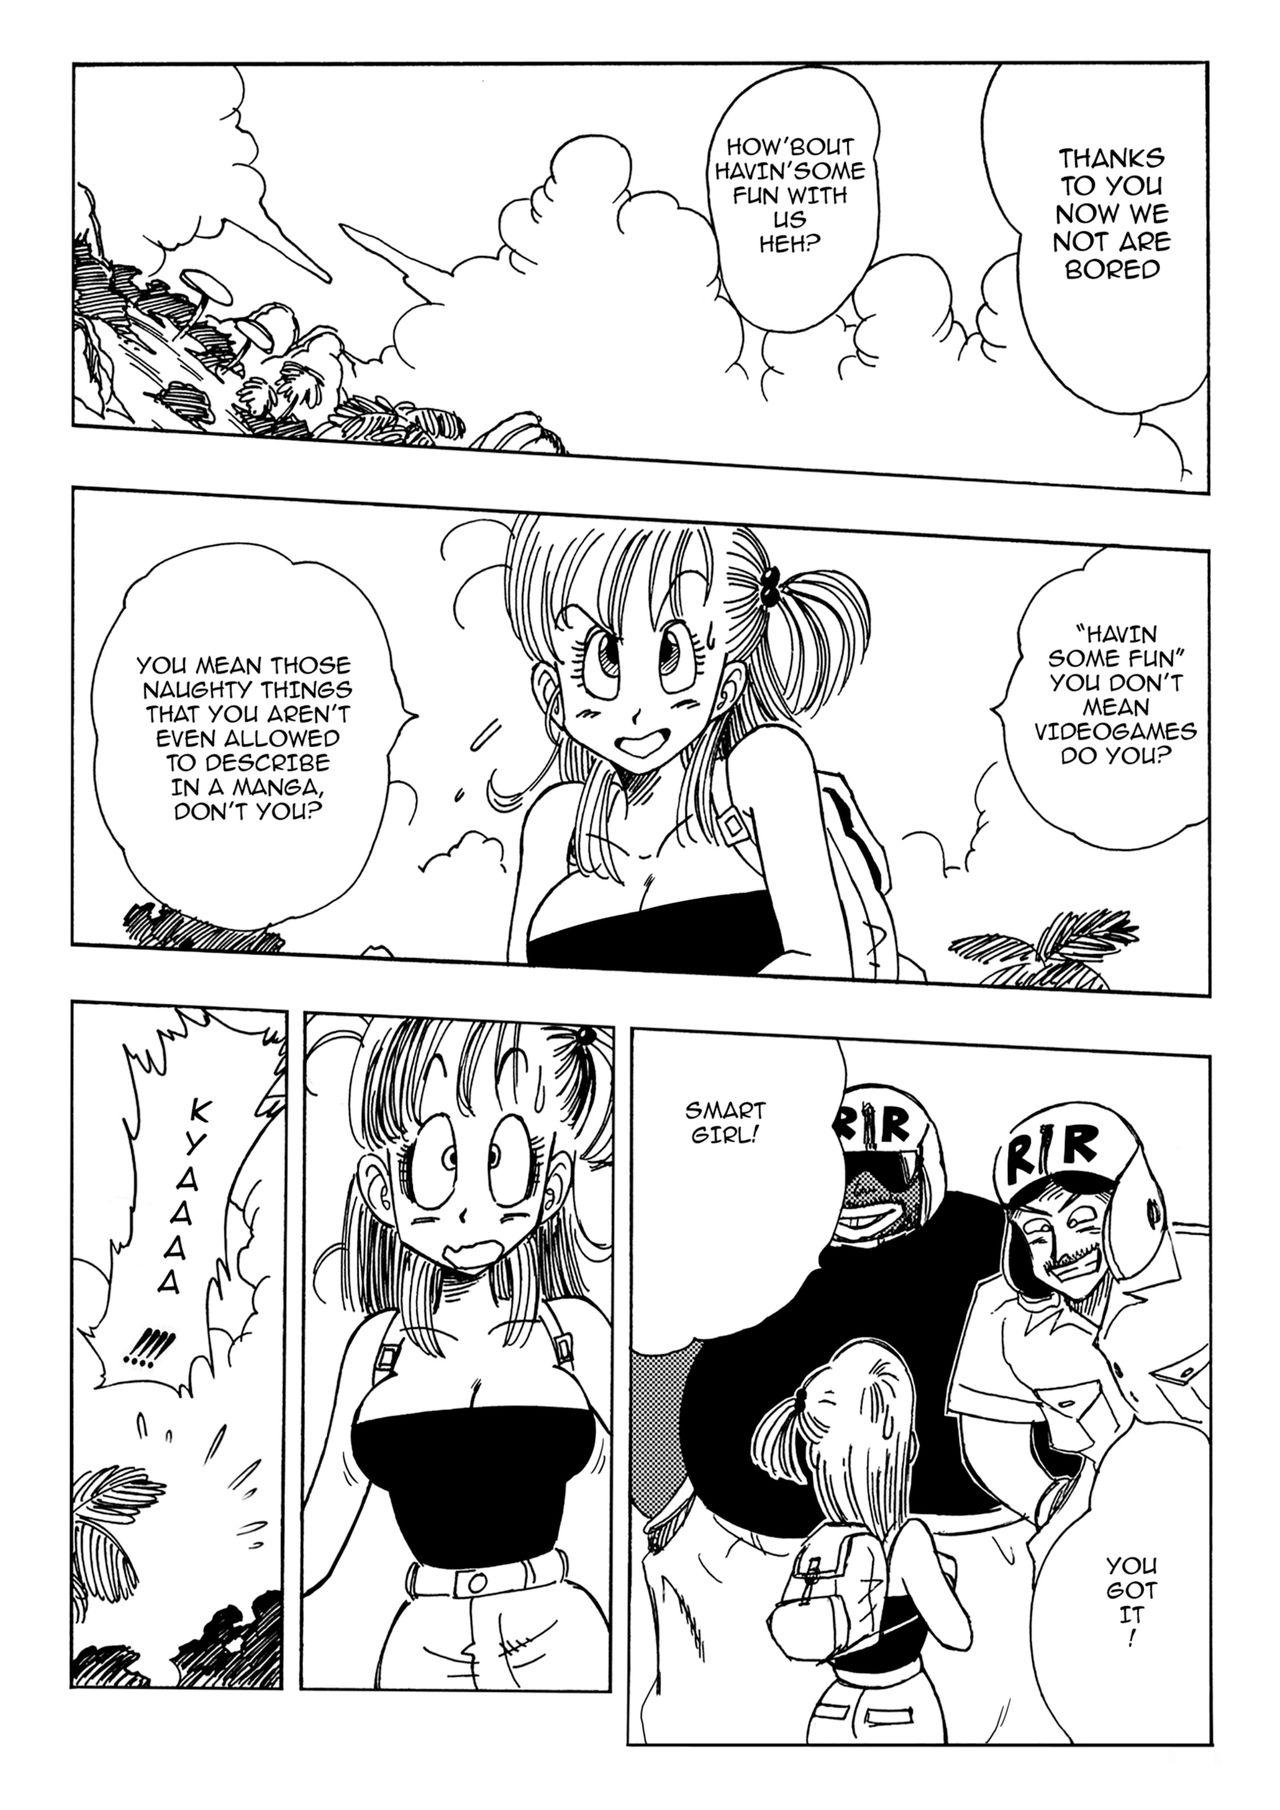 Foot Fetish Bulma and Friends - Dragon ball Hairypussy - Page 3